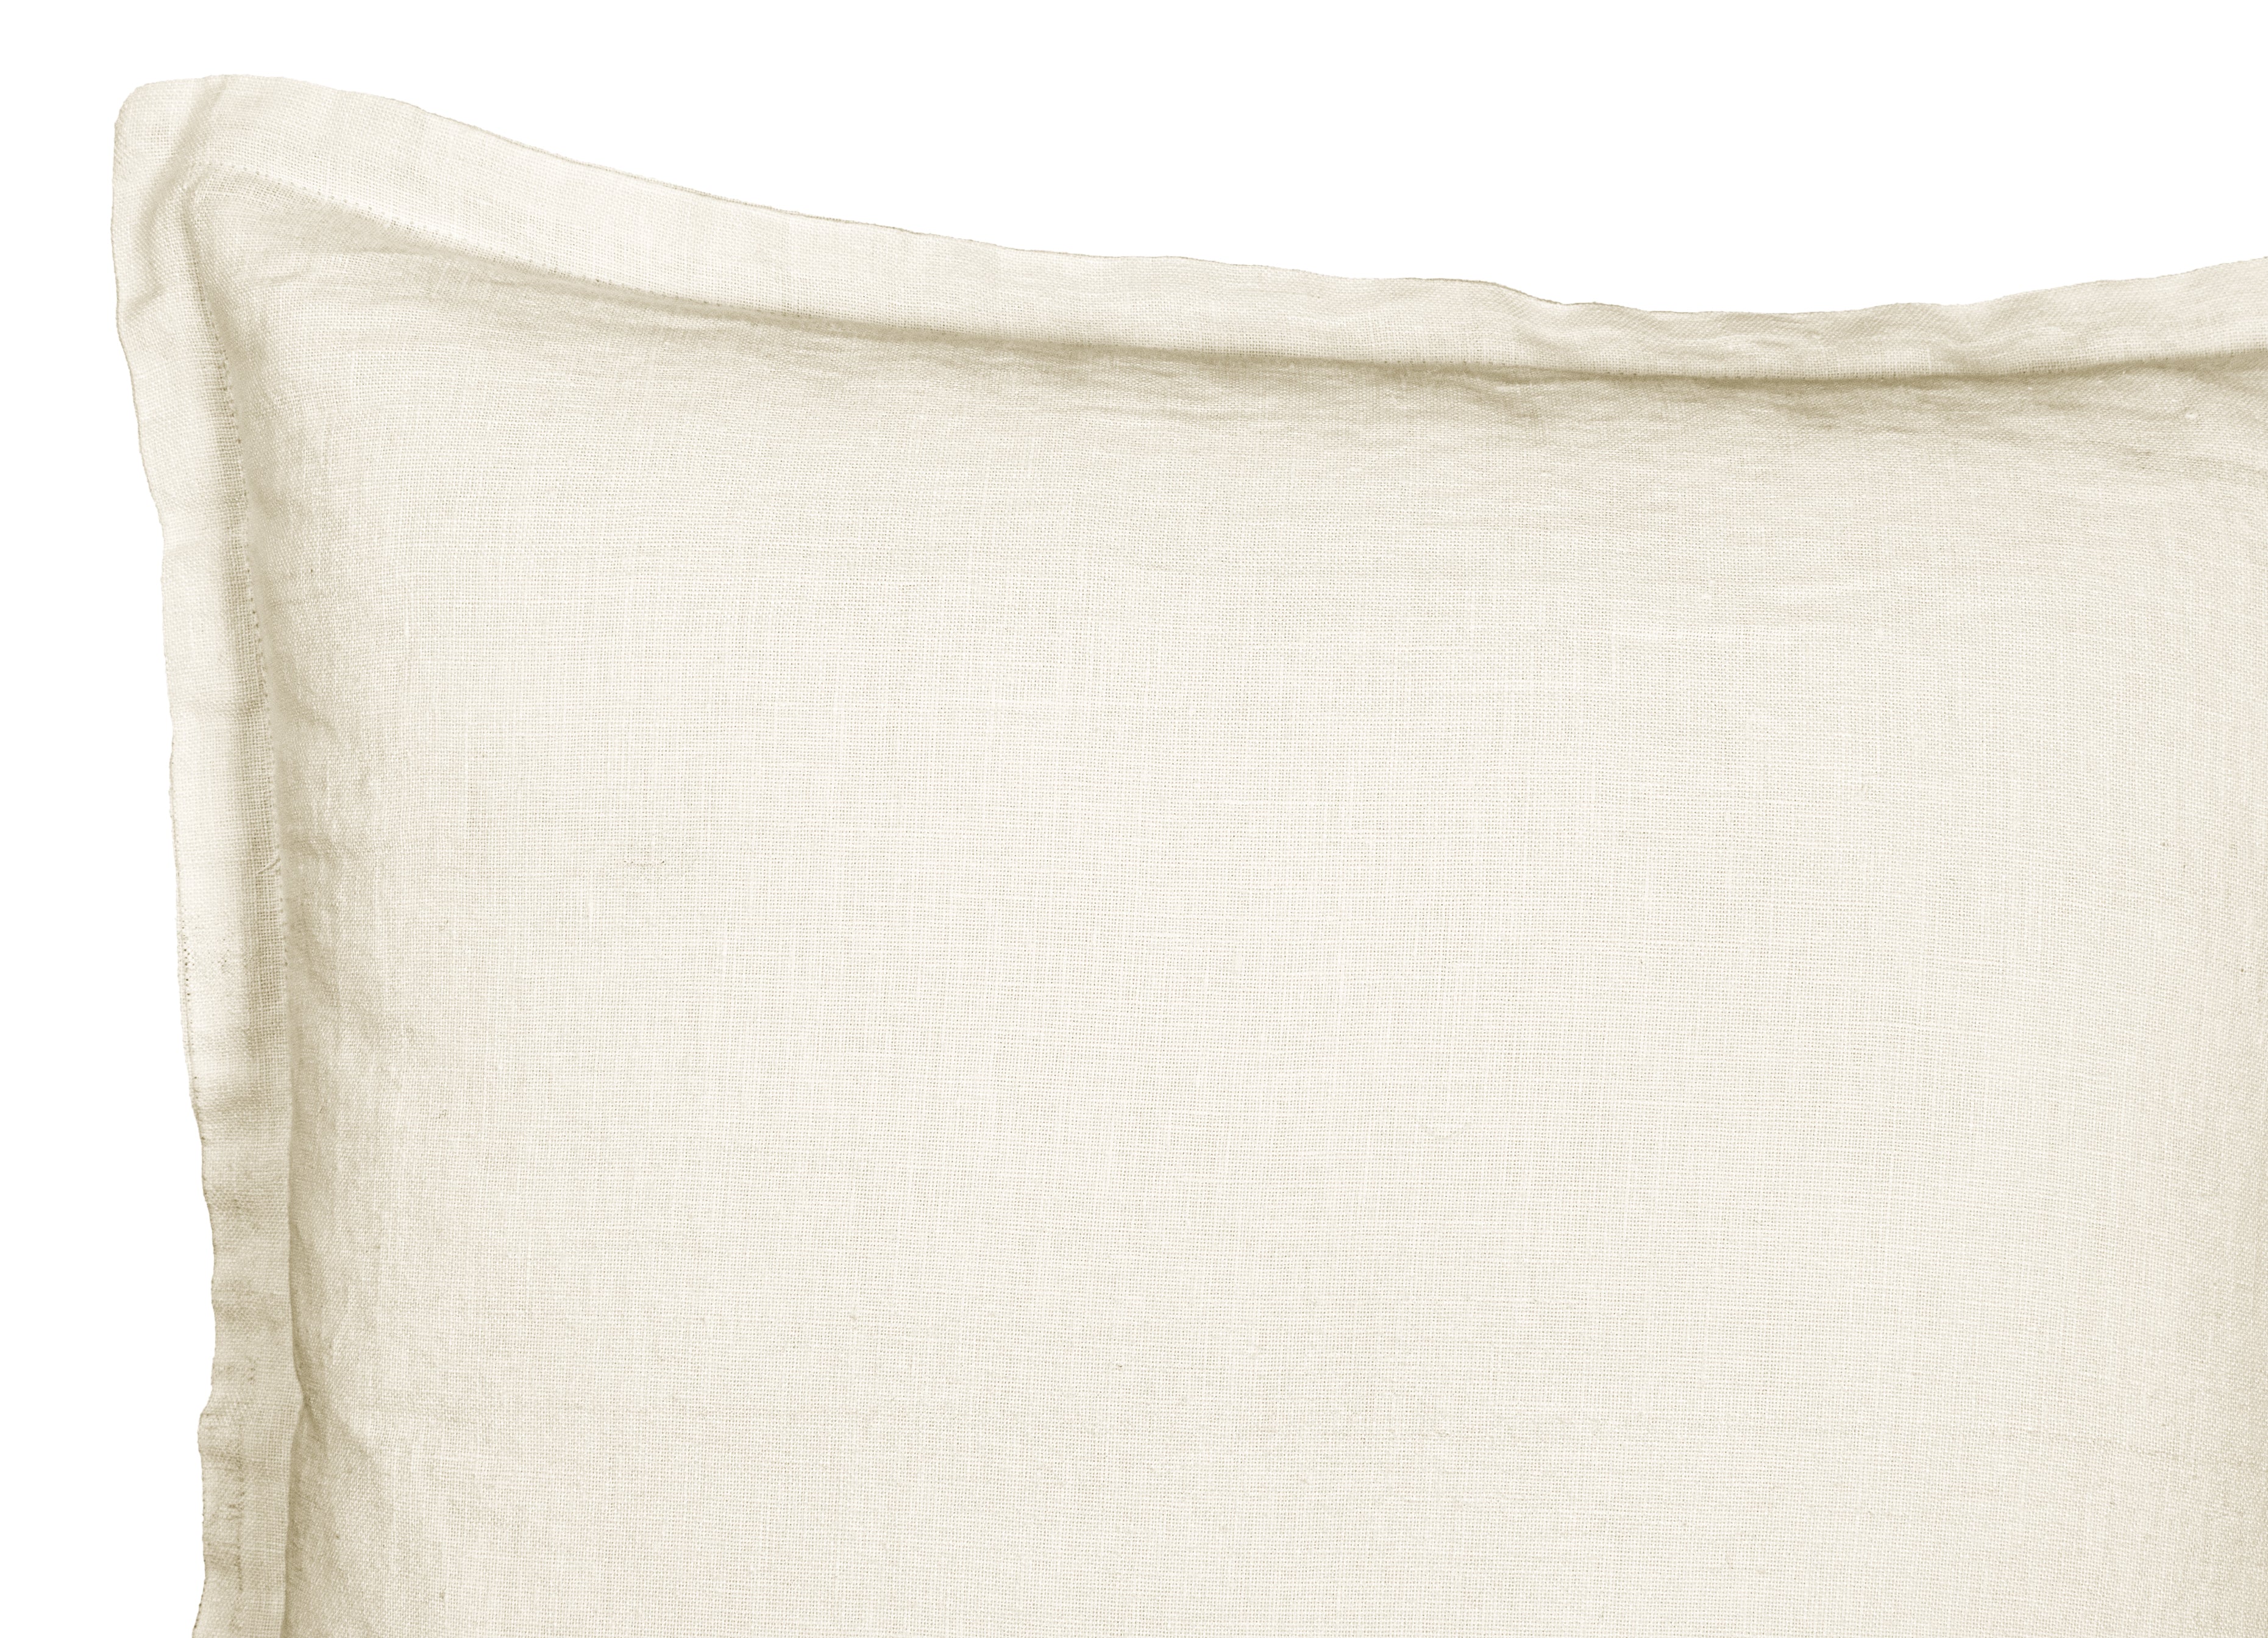 Washed Linen with Flange Decorative Pillow